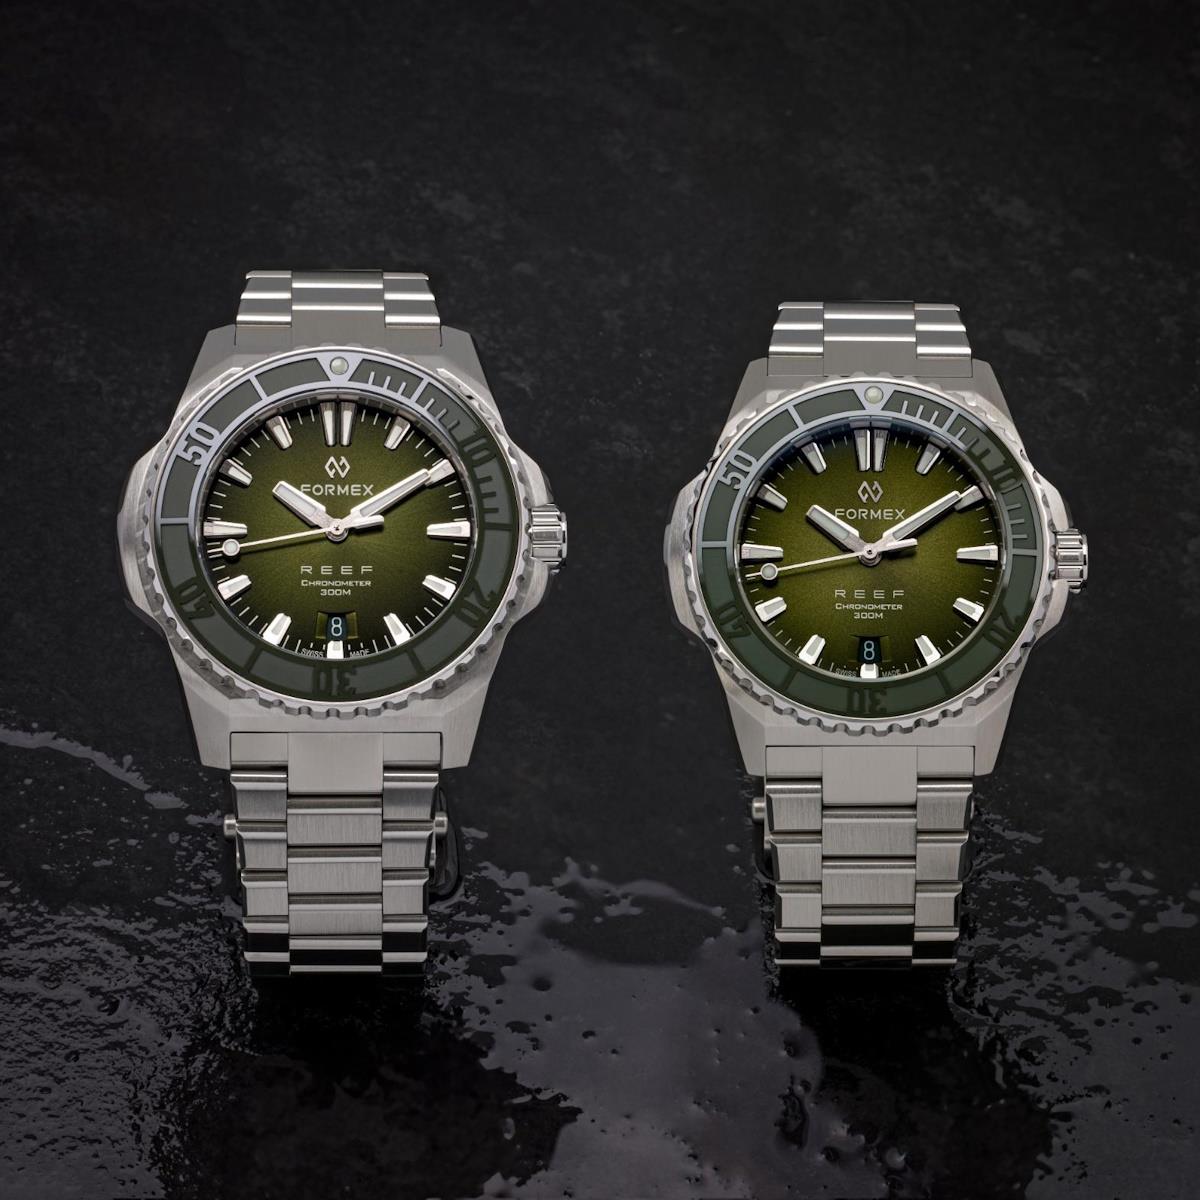 FORMEX Baby REEF Automatic Chronometer COSC 300M Steel Bracelet / Green Dial / Green Bezel